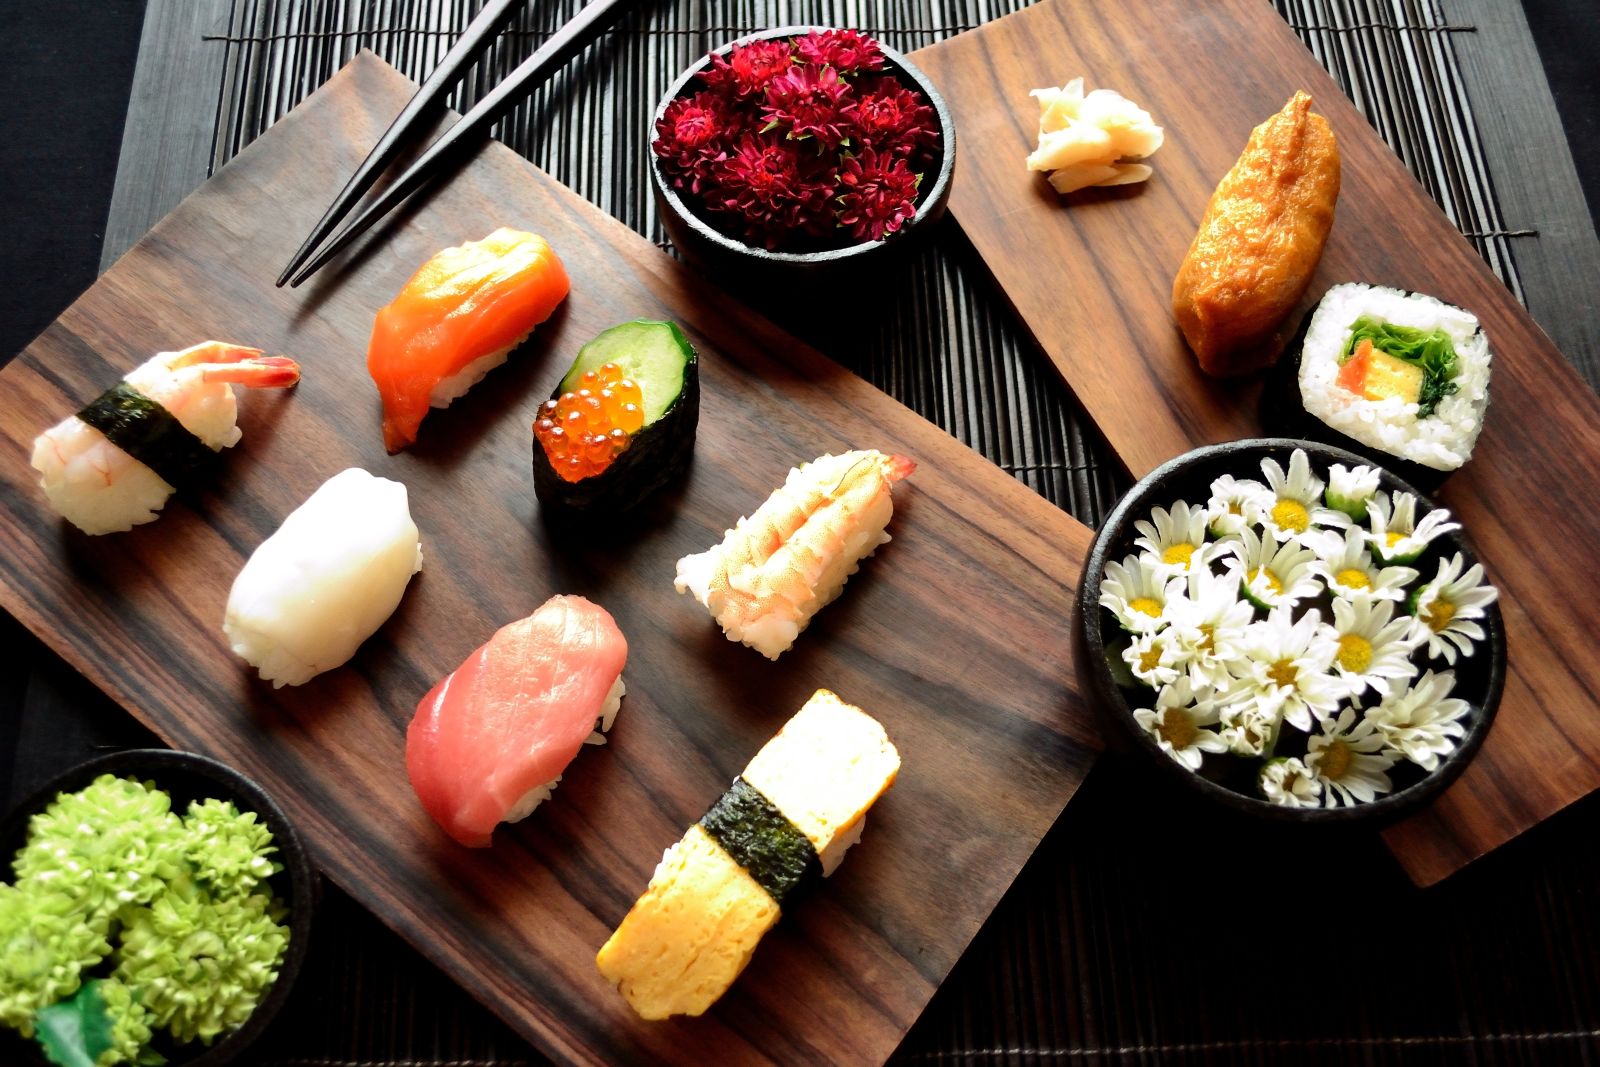 A wooden serving board displaying traditional Japanese sushi